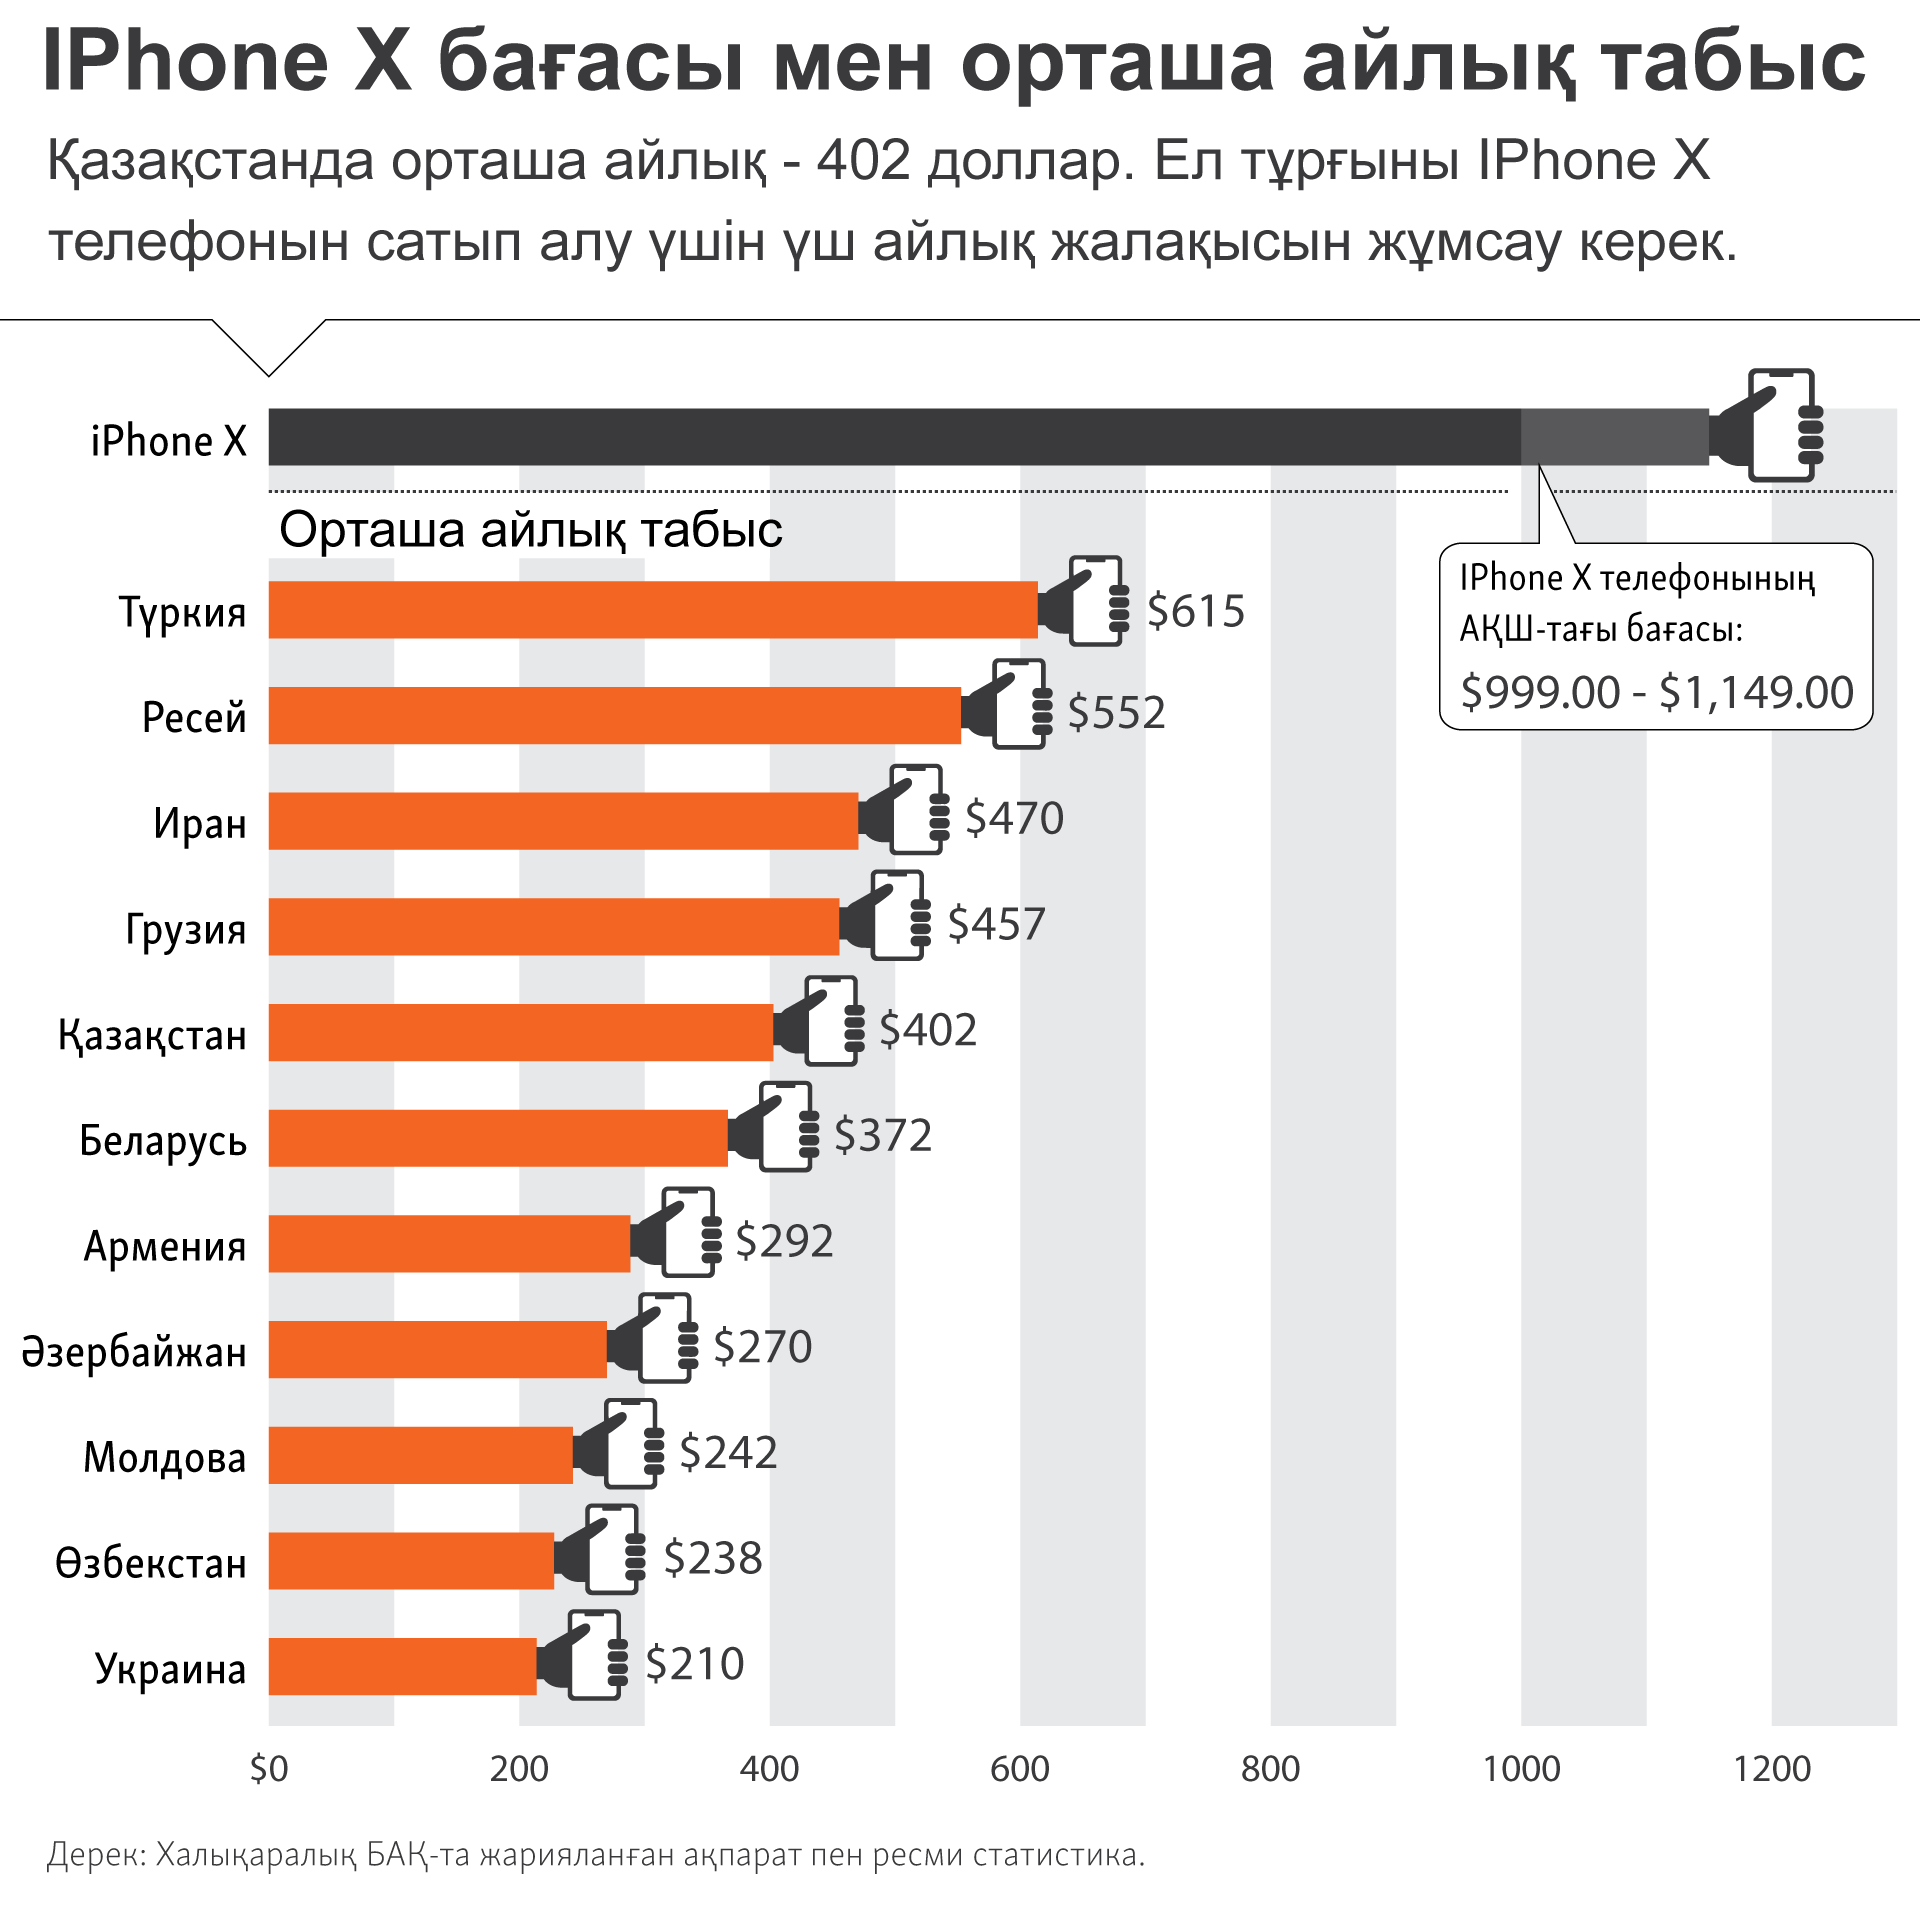 infographic about IPhone and wage